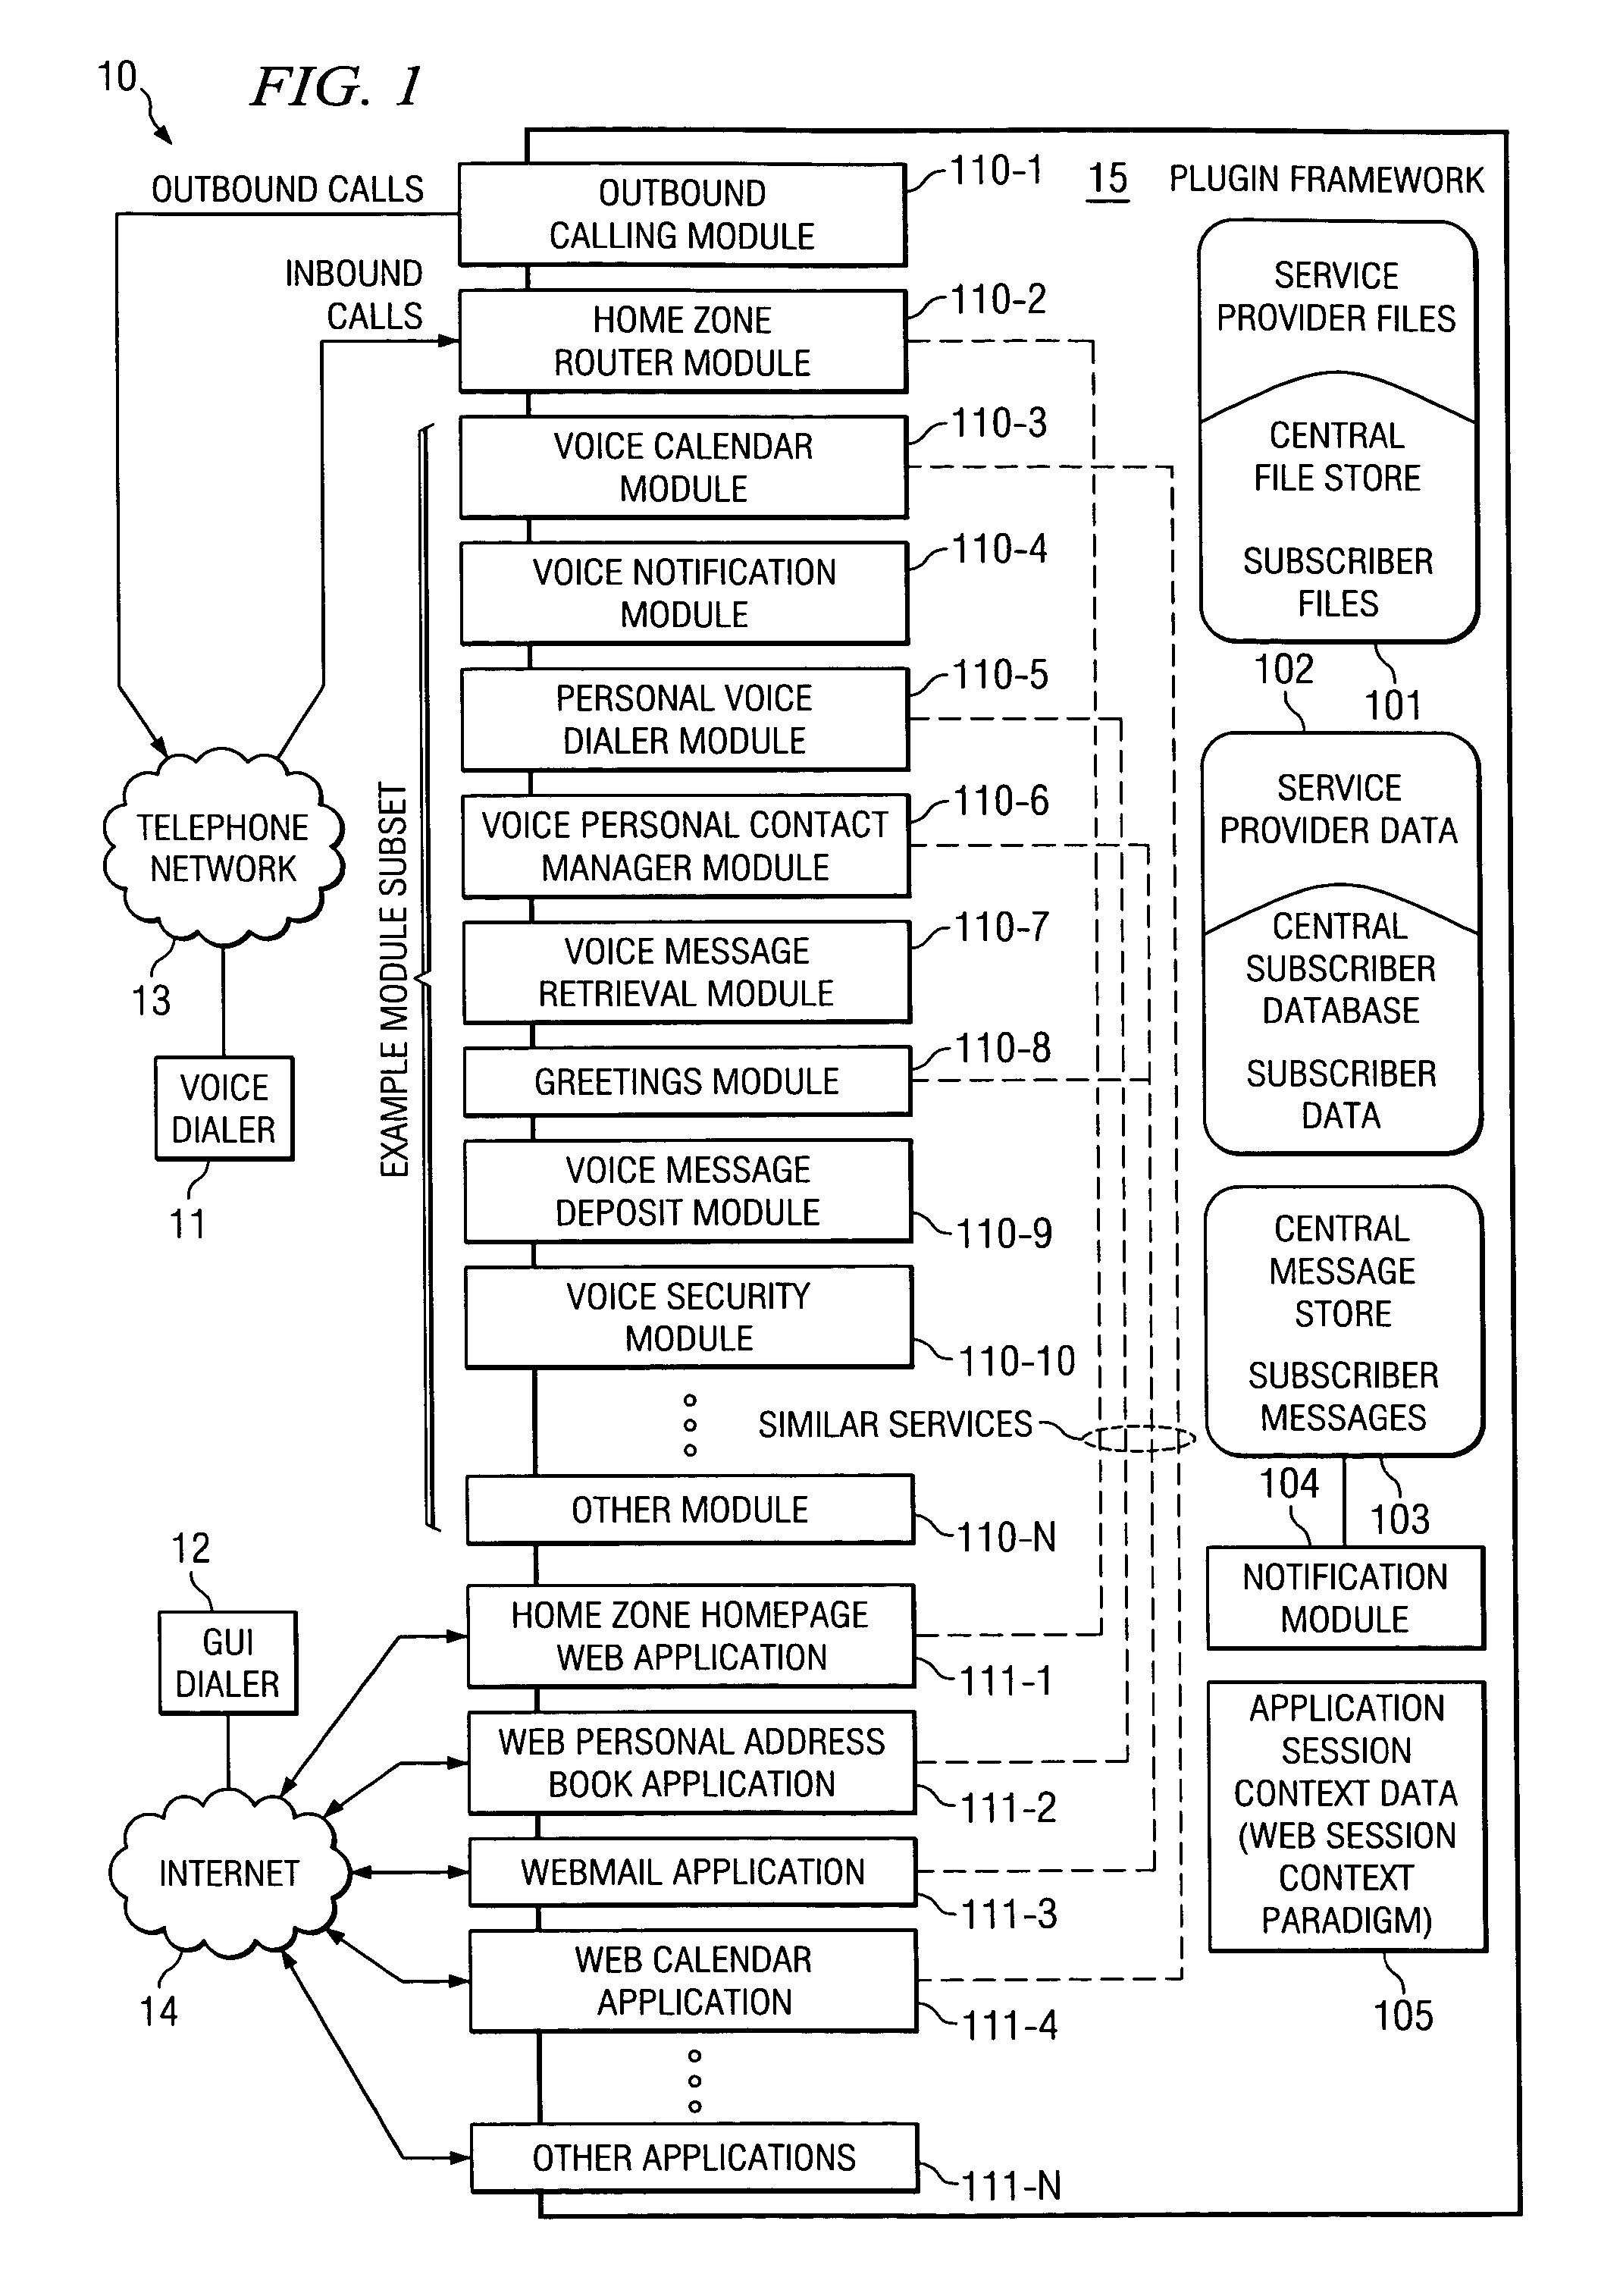 System and method for inheritance of advertised functionality in a user interactive system